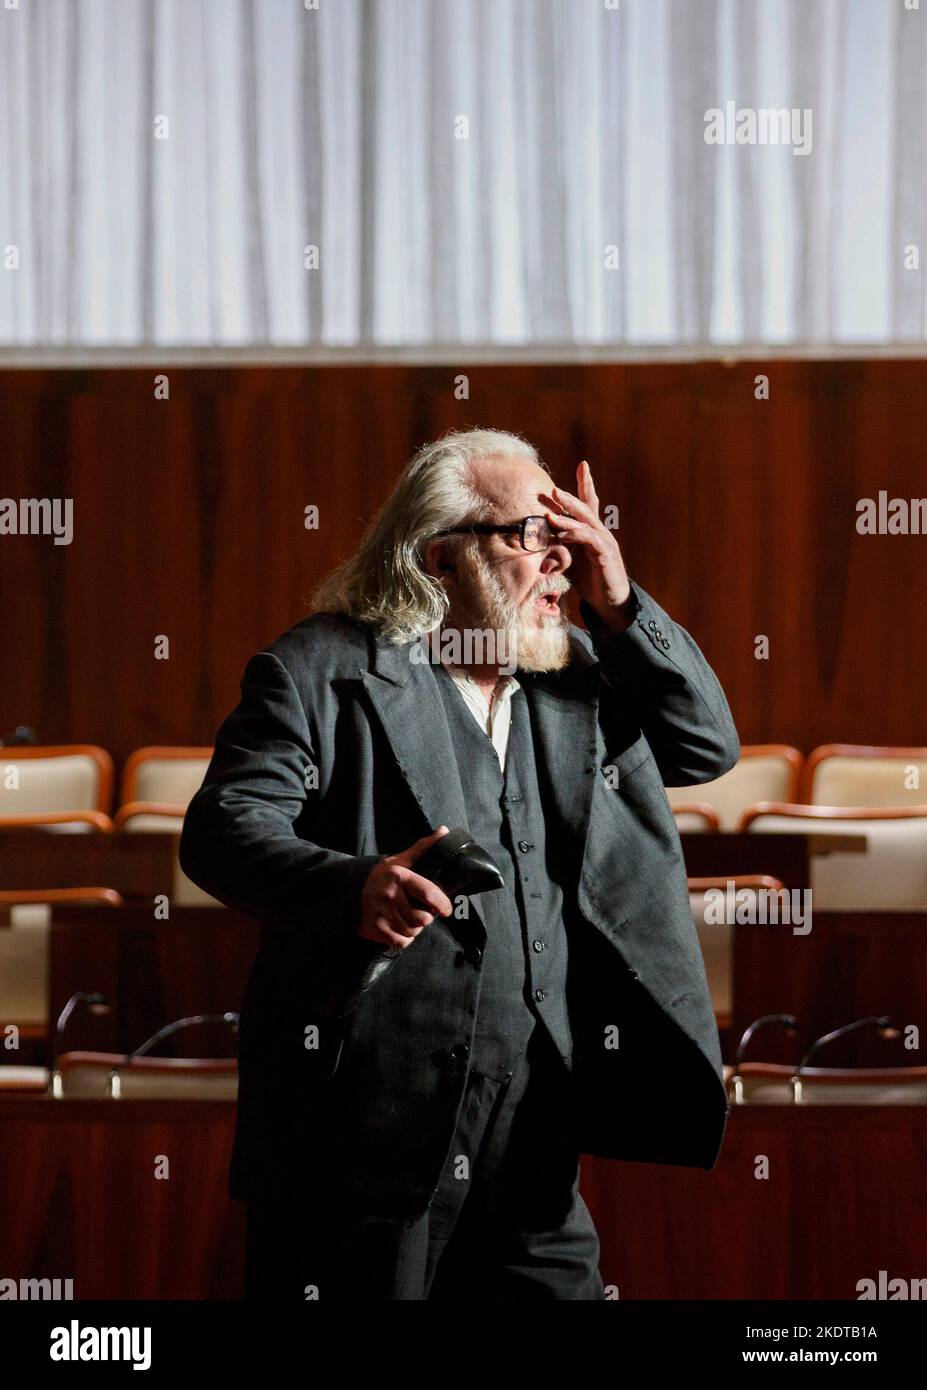 John Tomlinson (Moses) in MOSES UND ARON by Schoenberg at Welsh National Opera (WNO), Wales Millennium Centre, Cardiff, Wales  24/05/2014  conductor: Lother Koenigs  design: Anna Viebrock  lighting: Tim Mitchell  directors: Jossi Wieler & Sergio Morabito Stock Photo